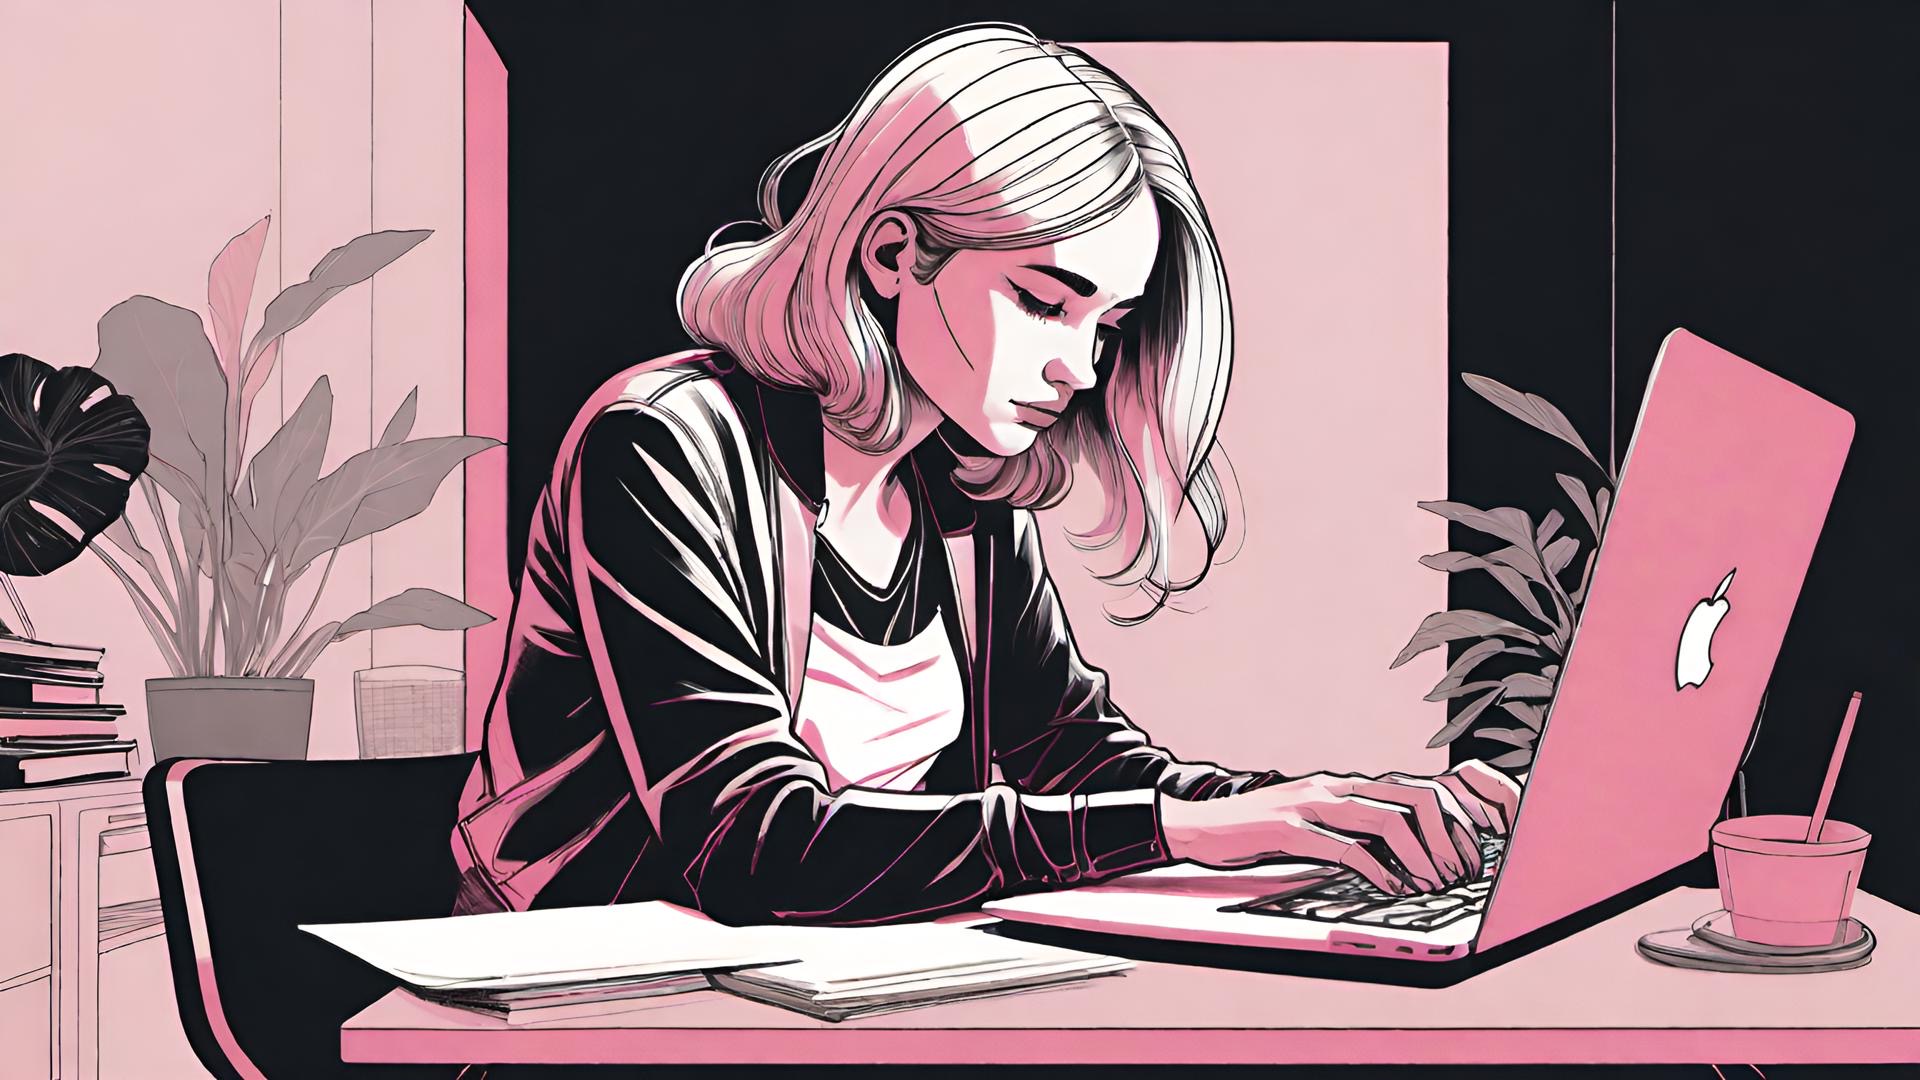 A woman sitting at a desk and typing on her MacBook. The image is black, white, and pink.